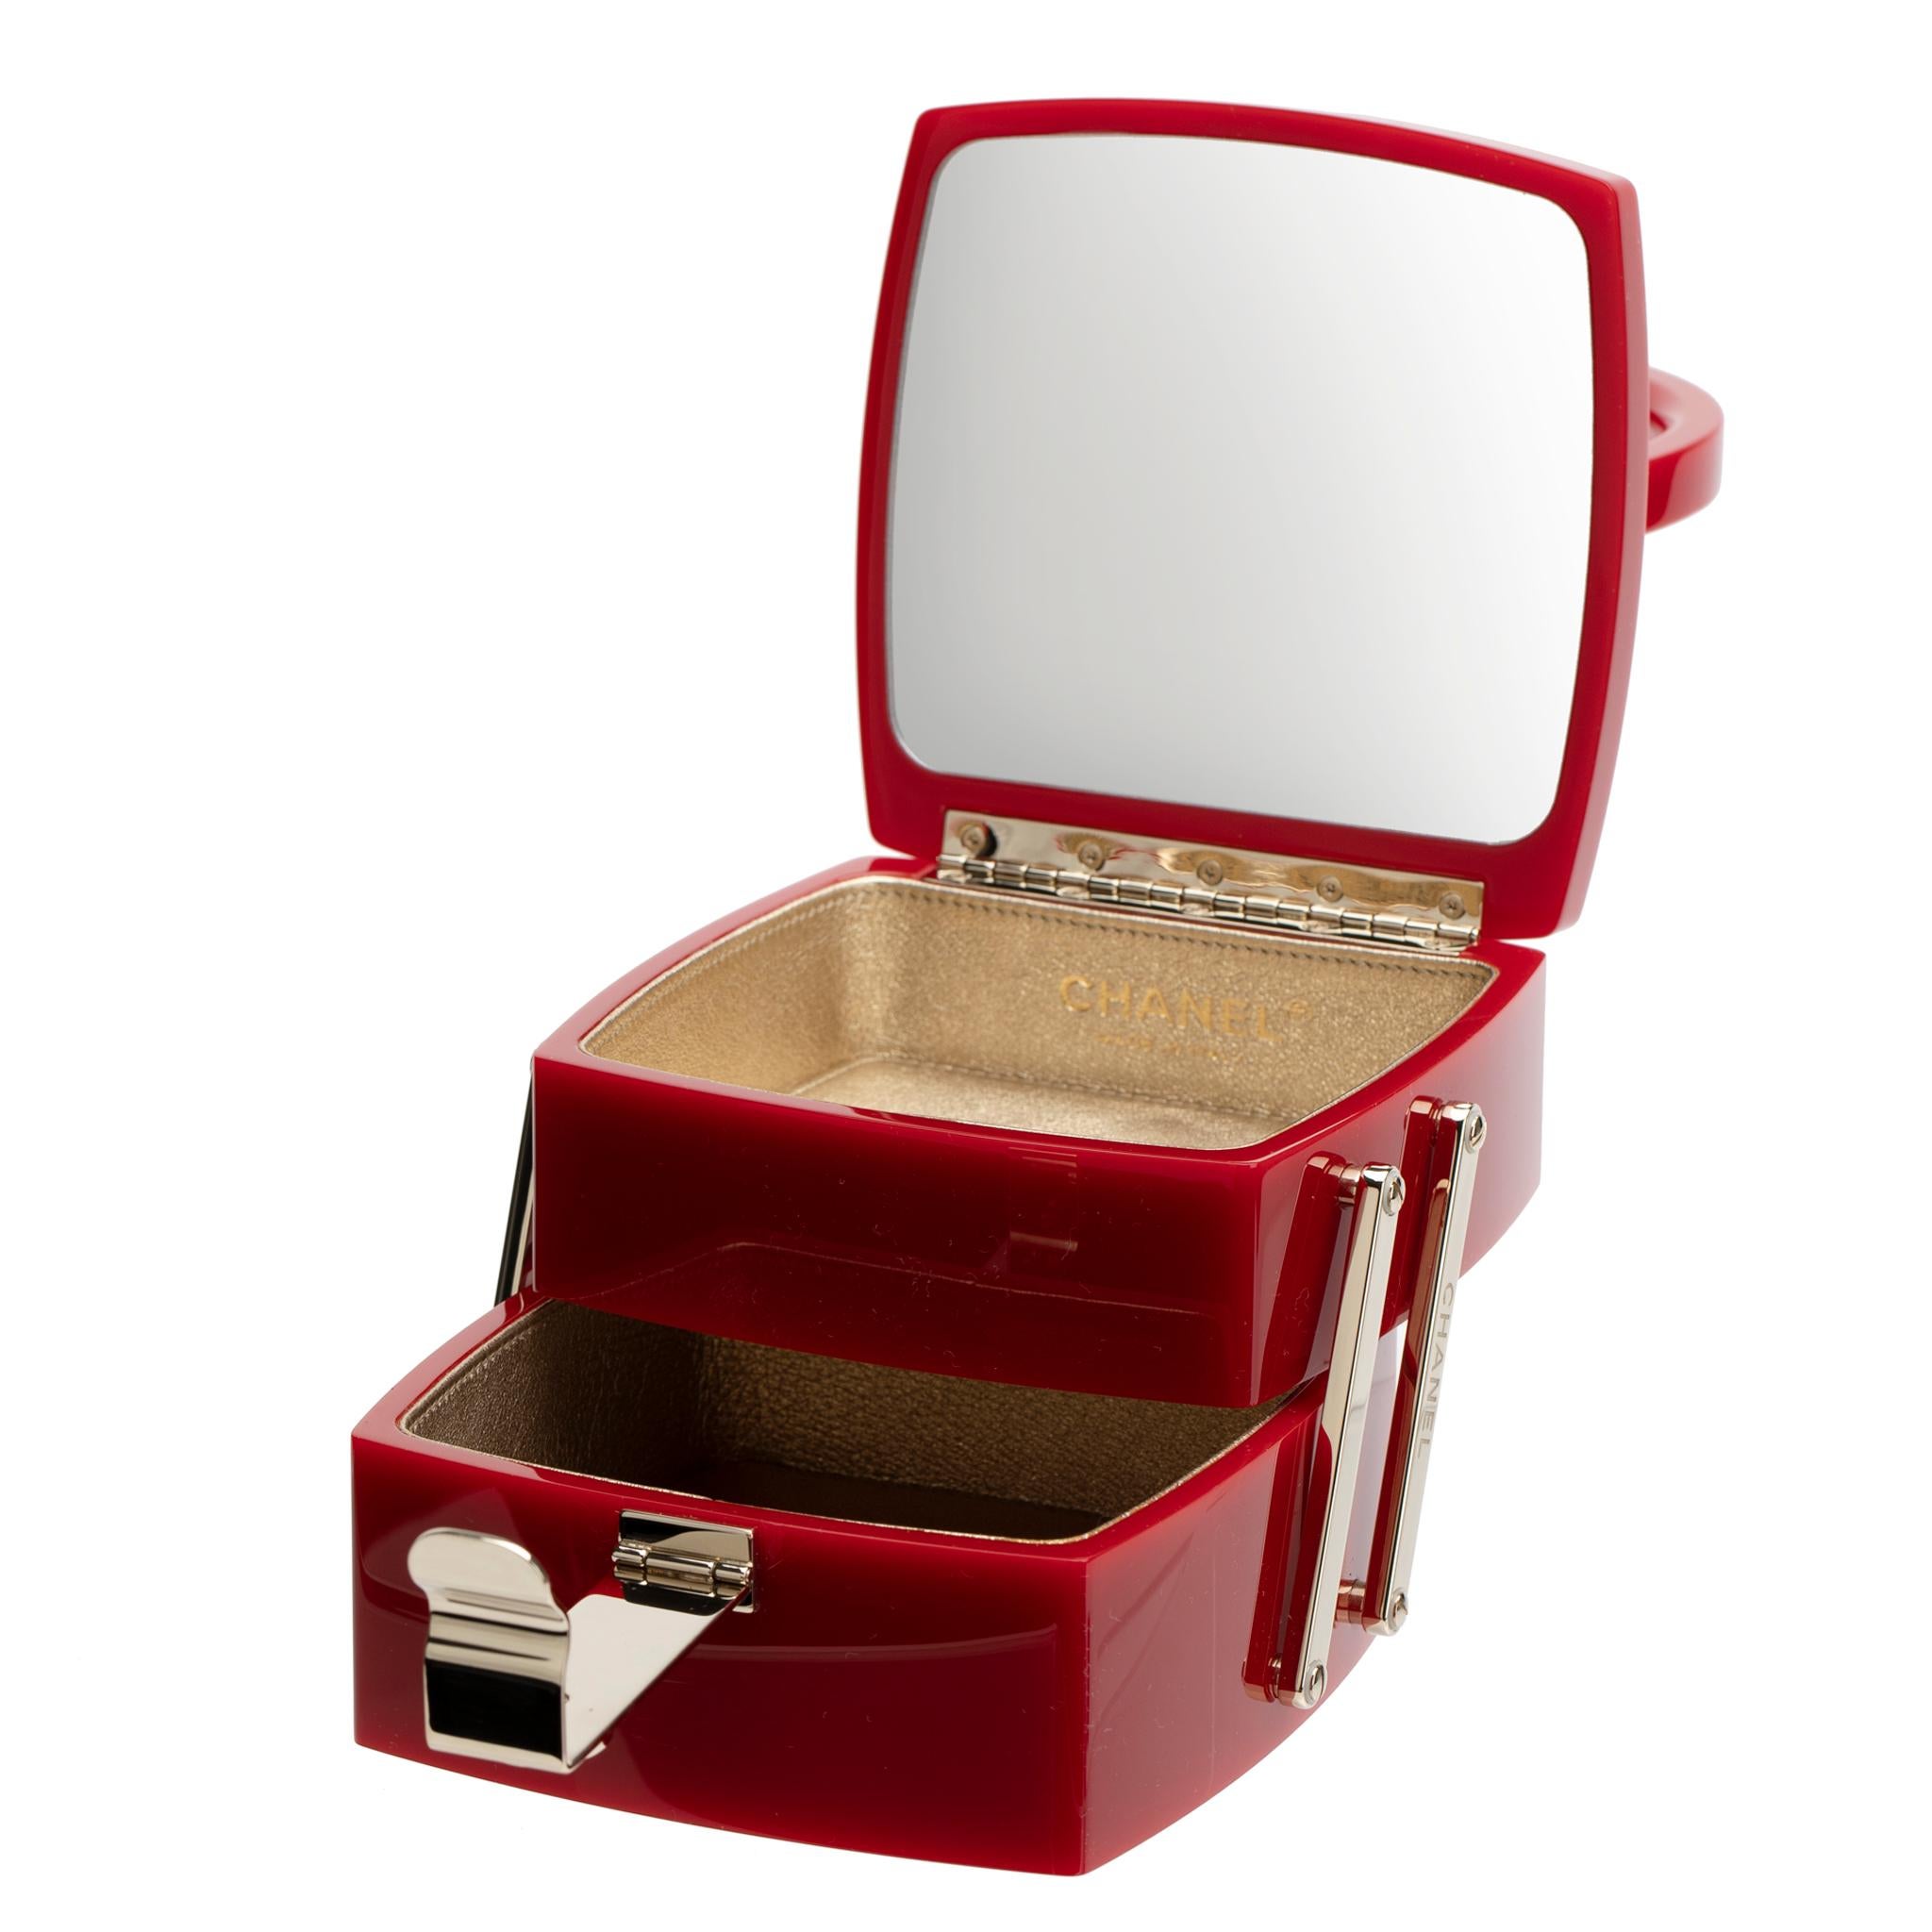 Chanel Minaudière Limited Edition Red Lucite Vanity Case With Mirror In Excellent Condition In Sydney, New South Wales